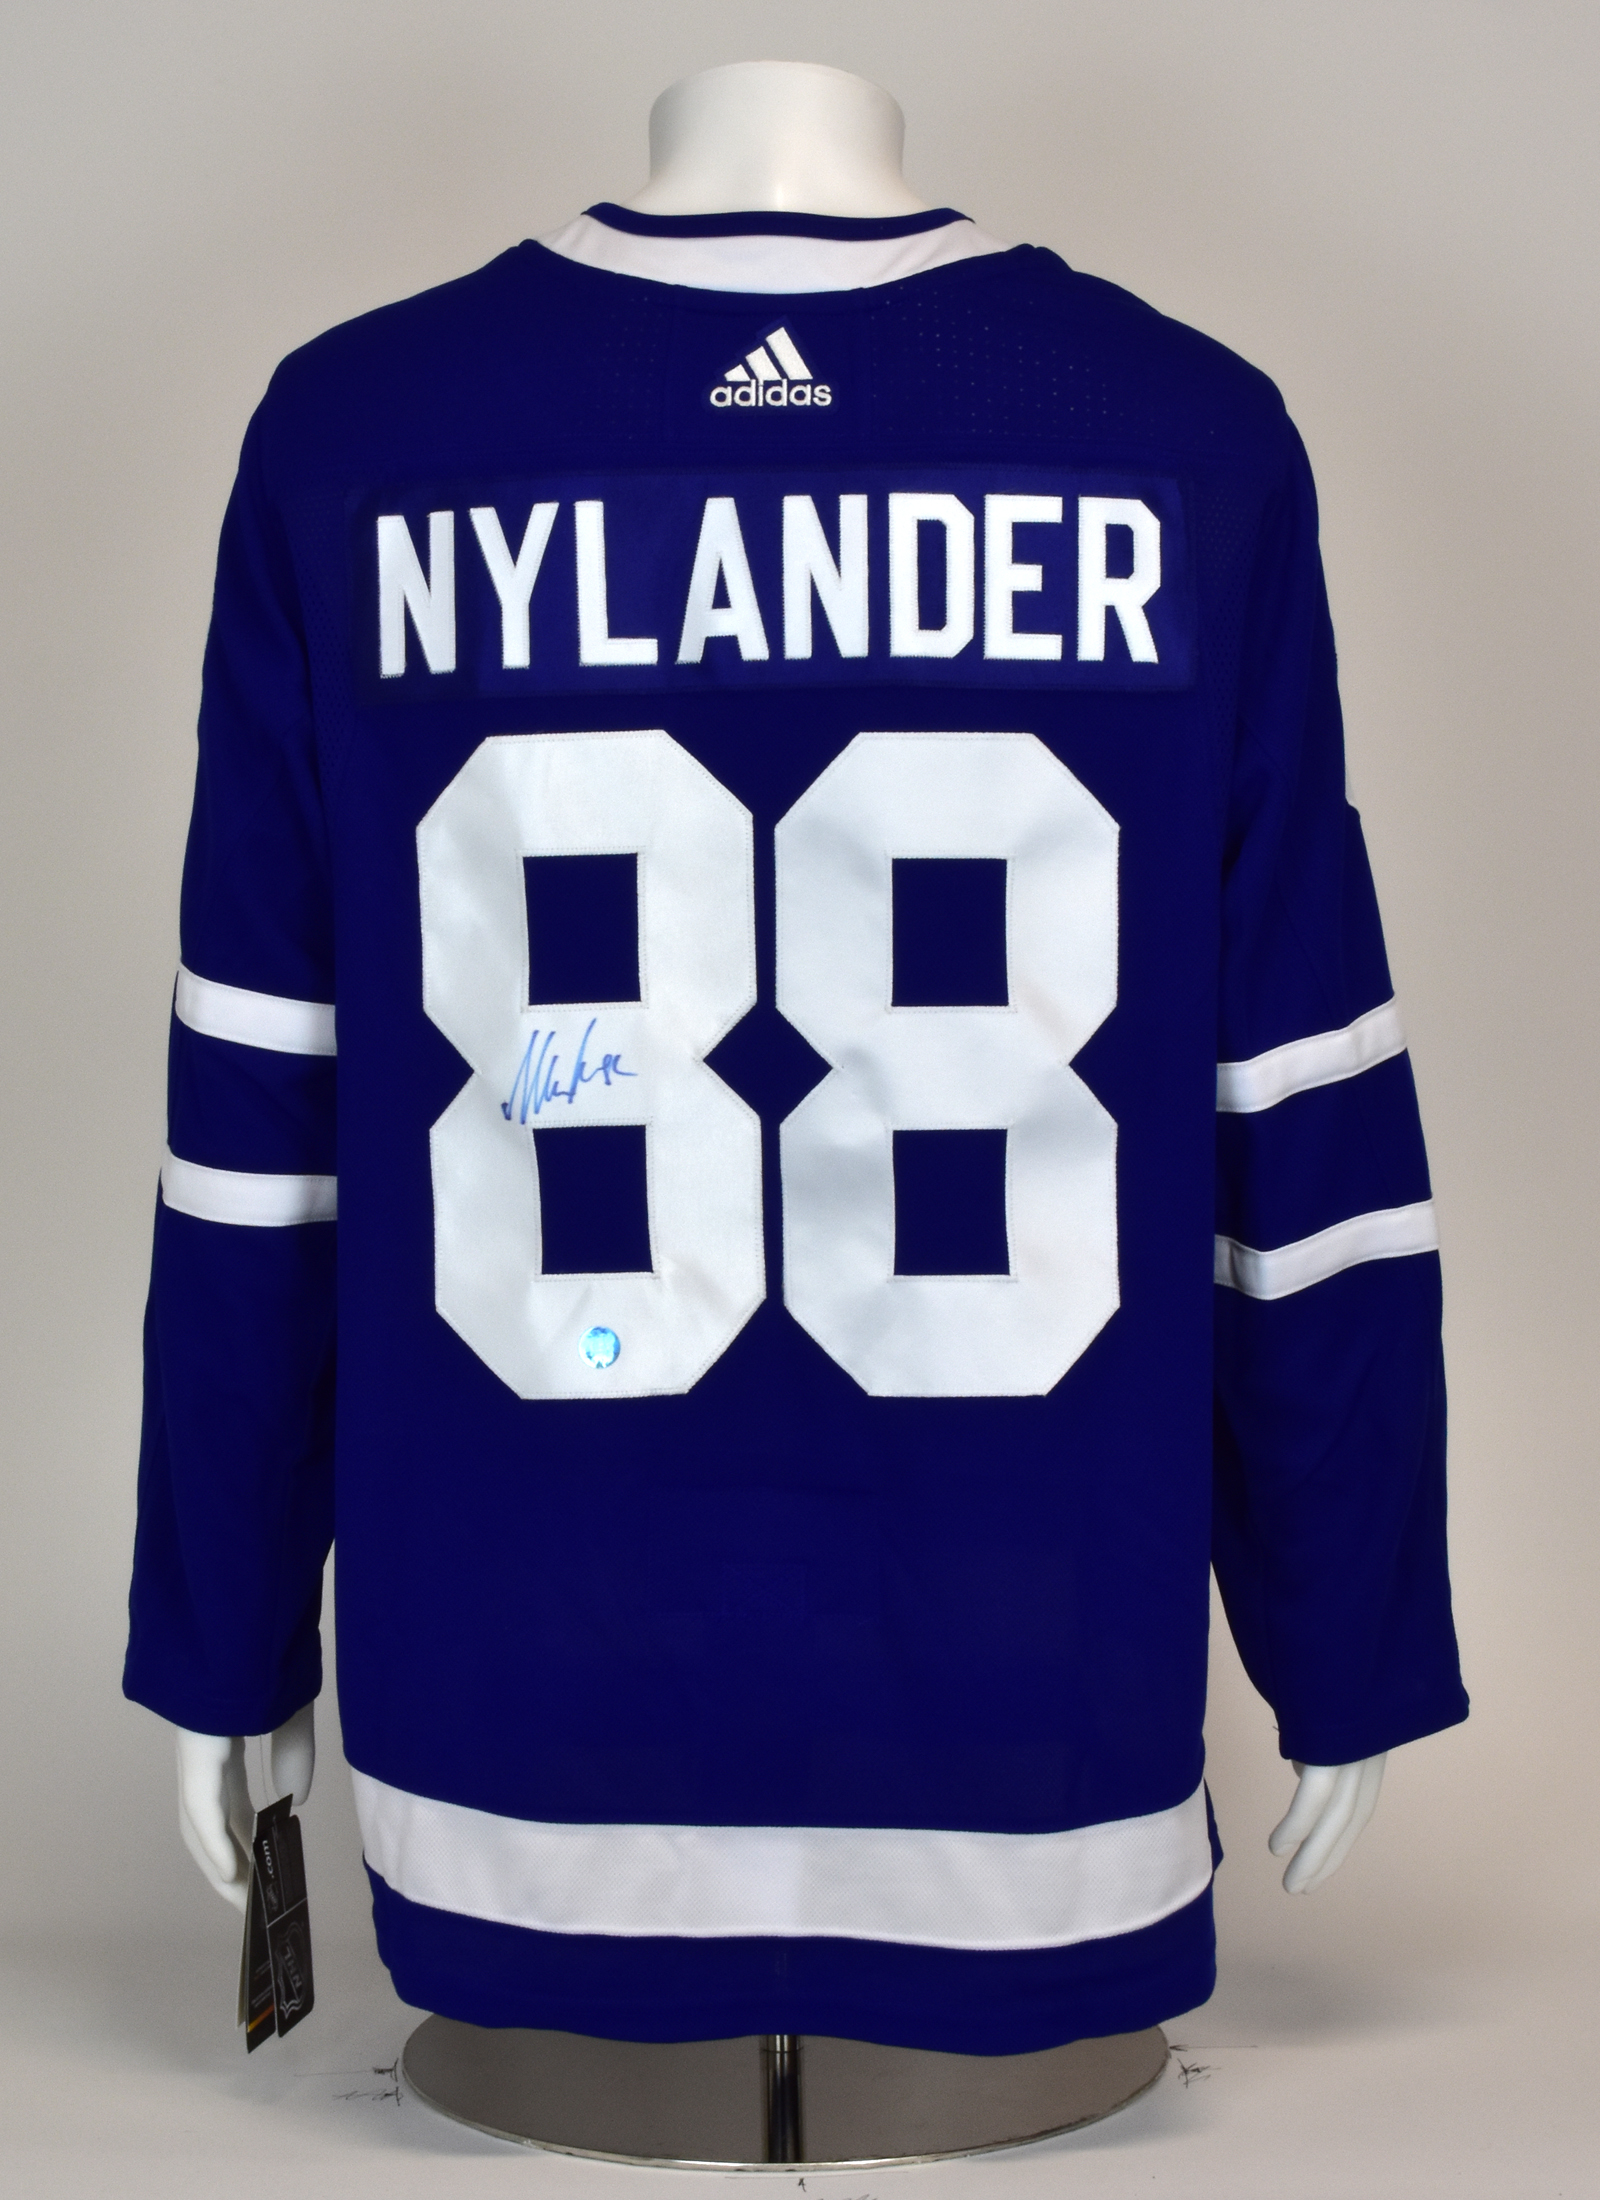 WILLIAM NYLANDER AUTOGRAPH JERSEY SHADOW BOX NOT INCLUDED